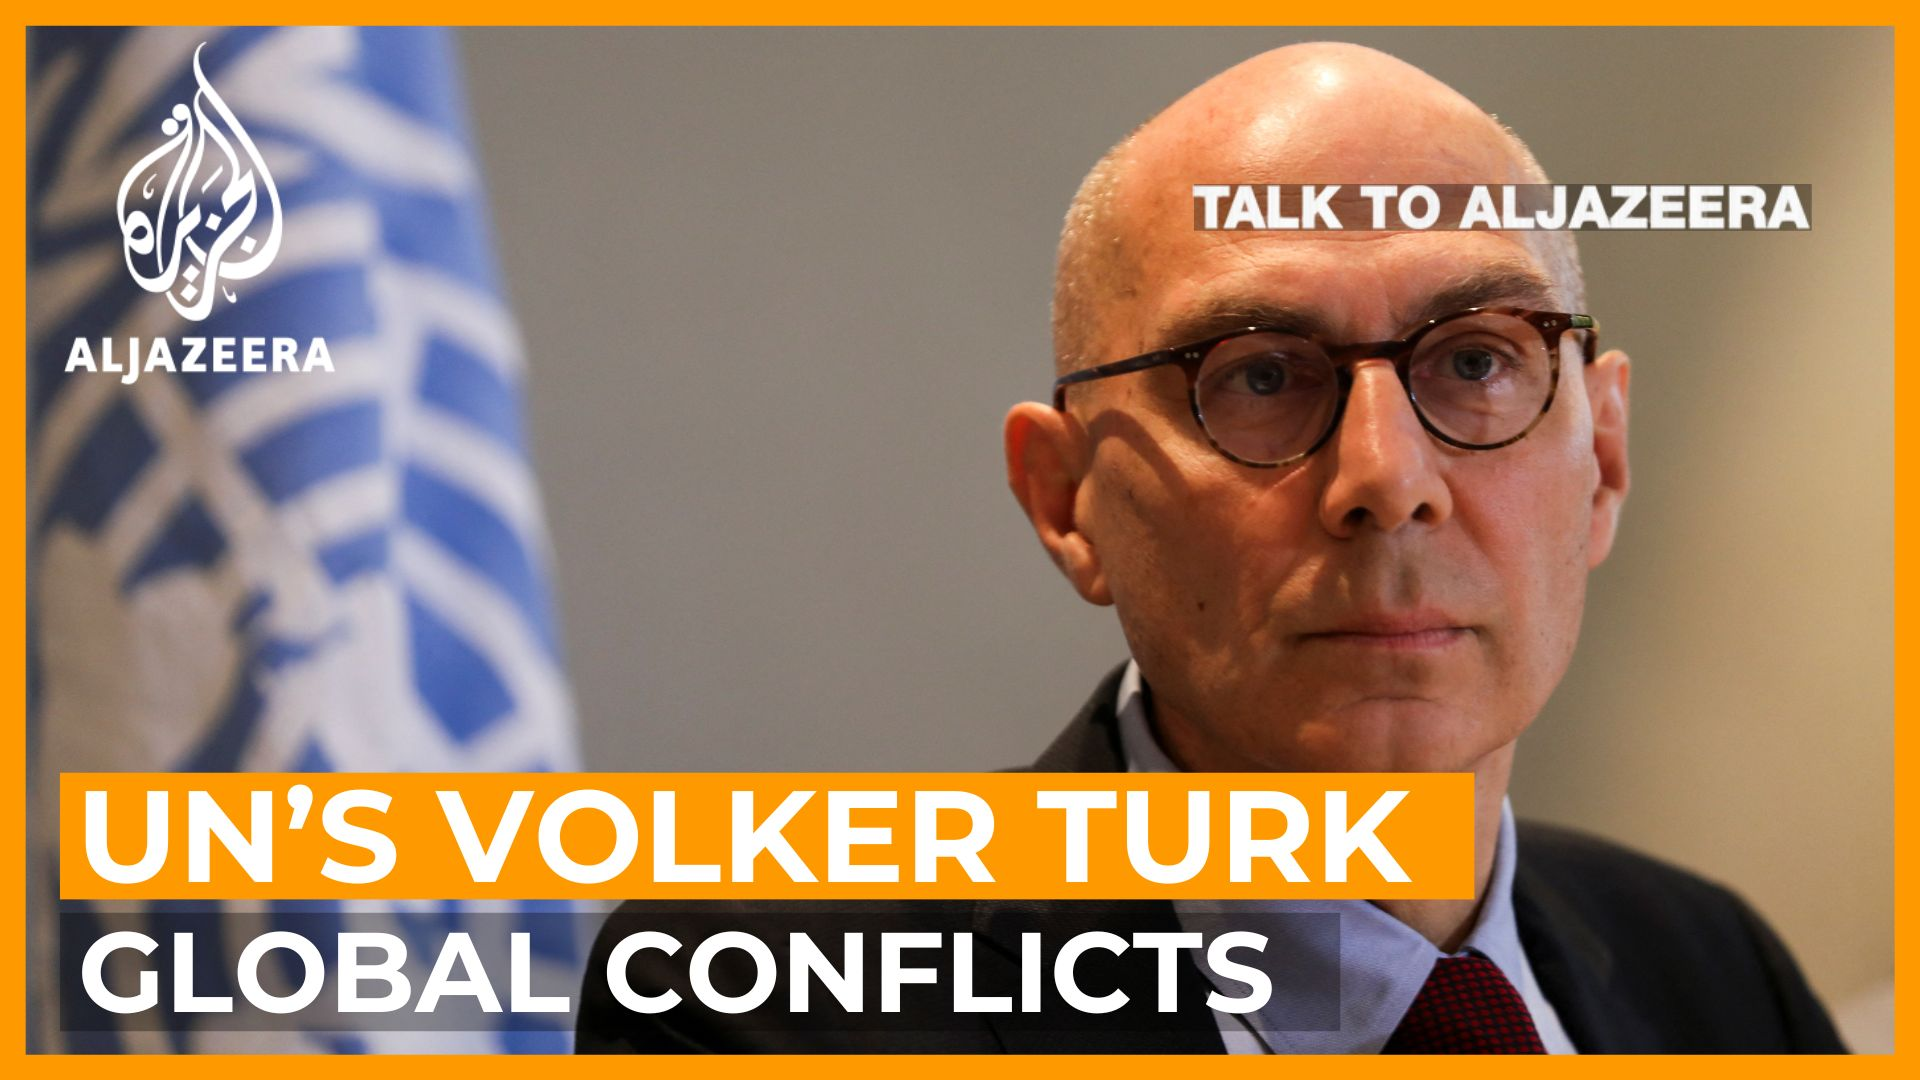 UN’s Volker Turk: A quarter of humanity is caught in 55 global conflicts